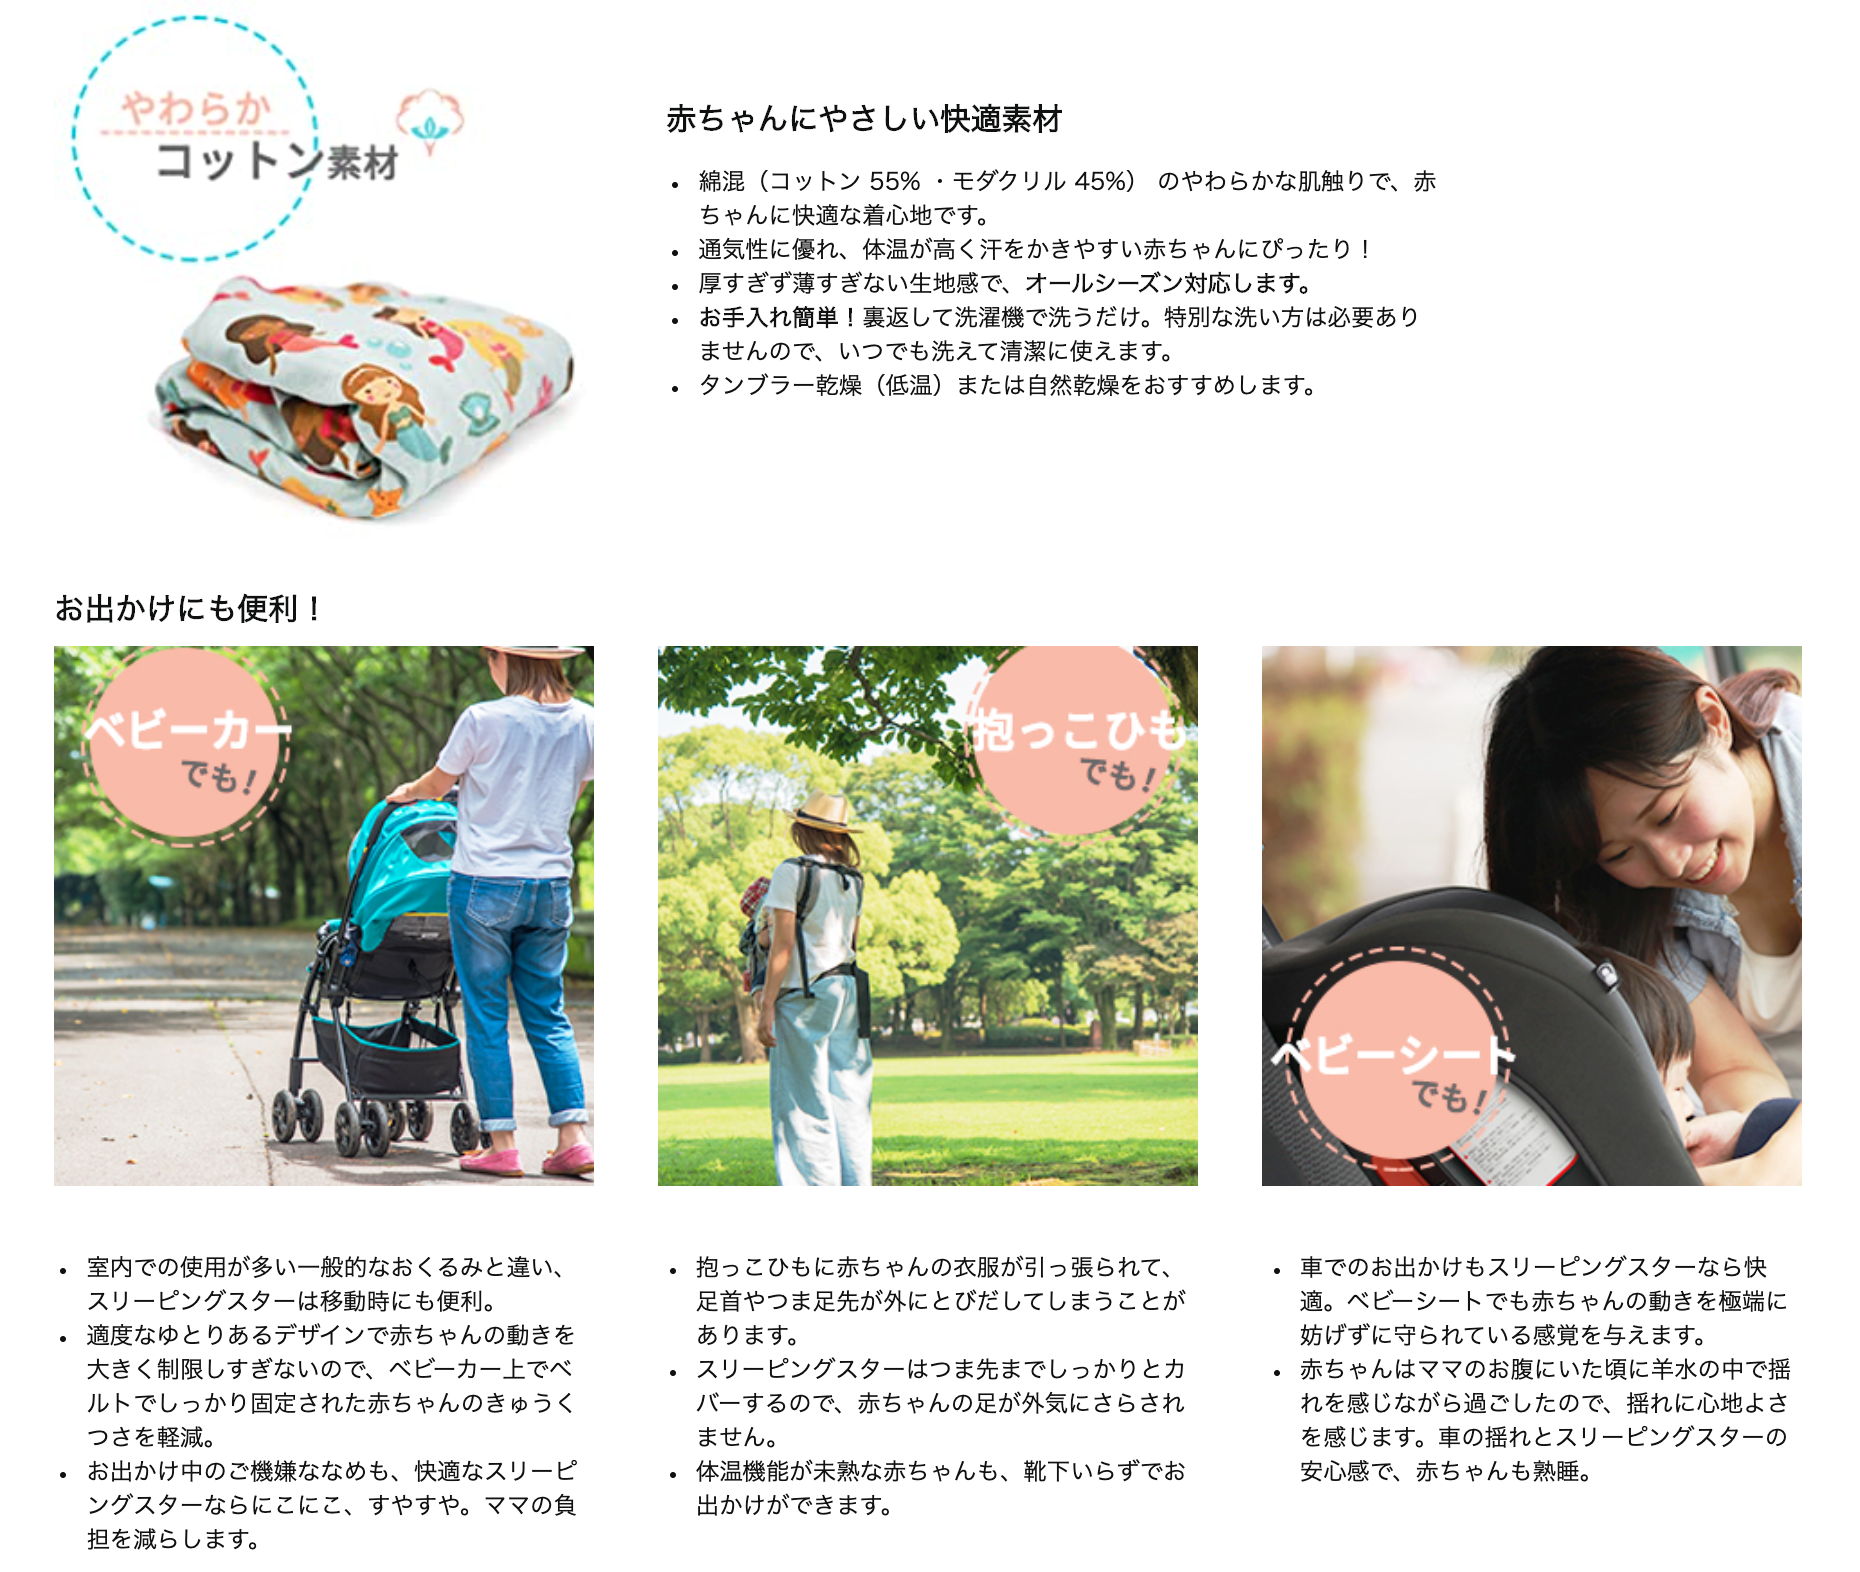 Japanese ecommerce agency services in Tokyo testing A+ content example